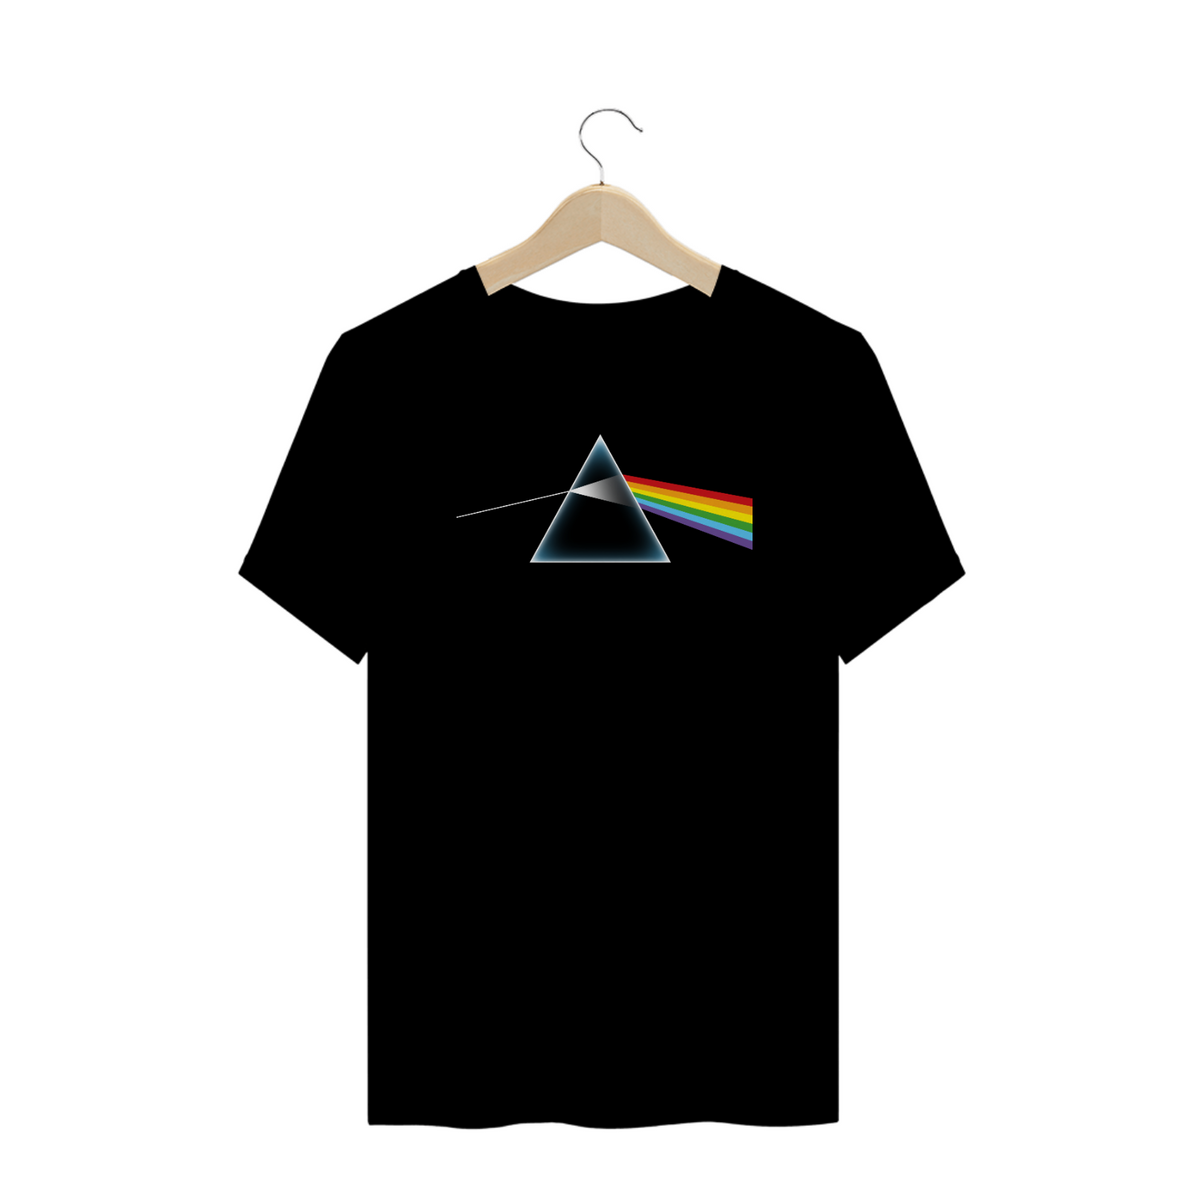 Nome do produto: Pink Floyd - The Dark Side of the Moon 2